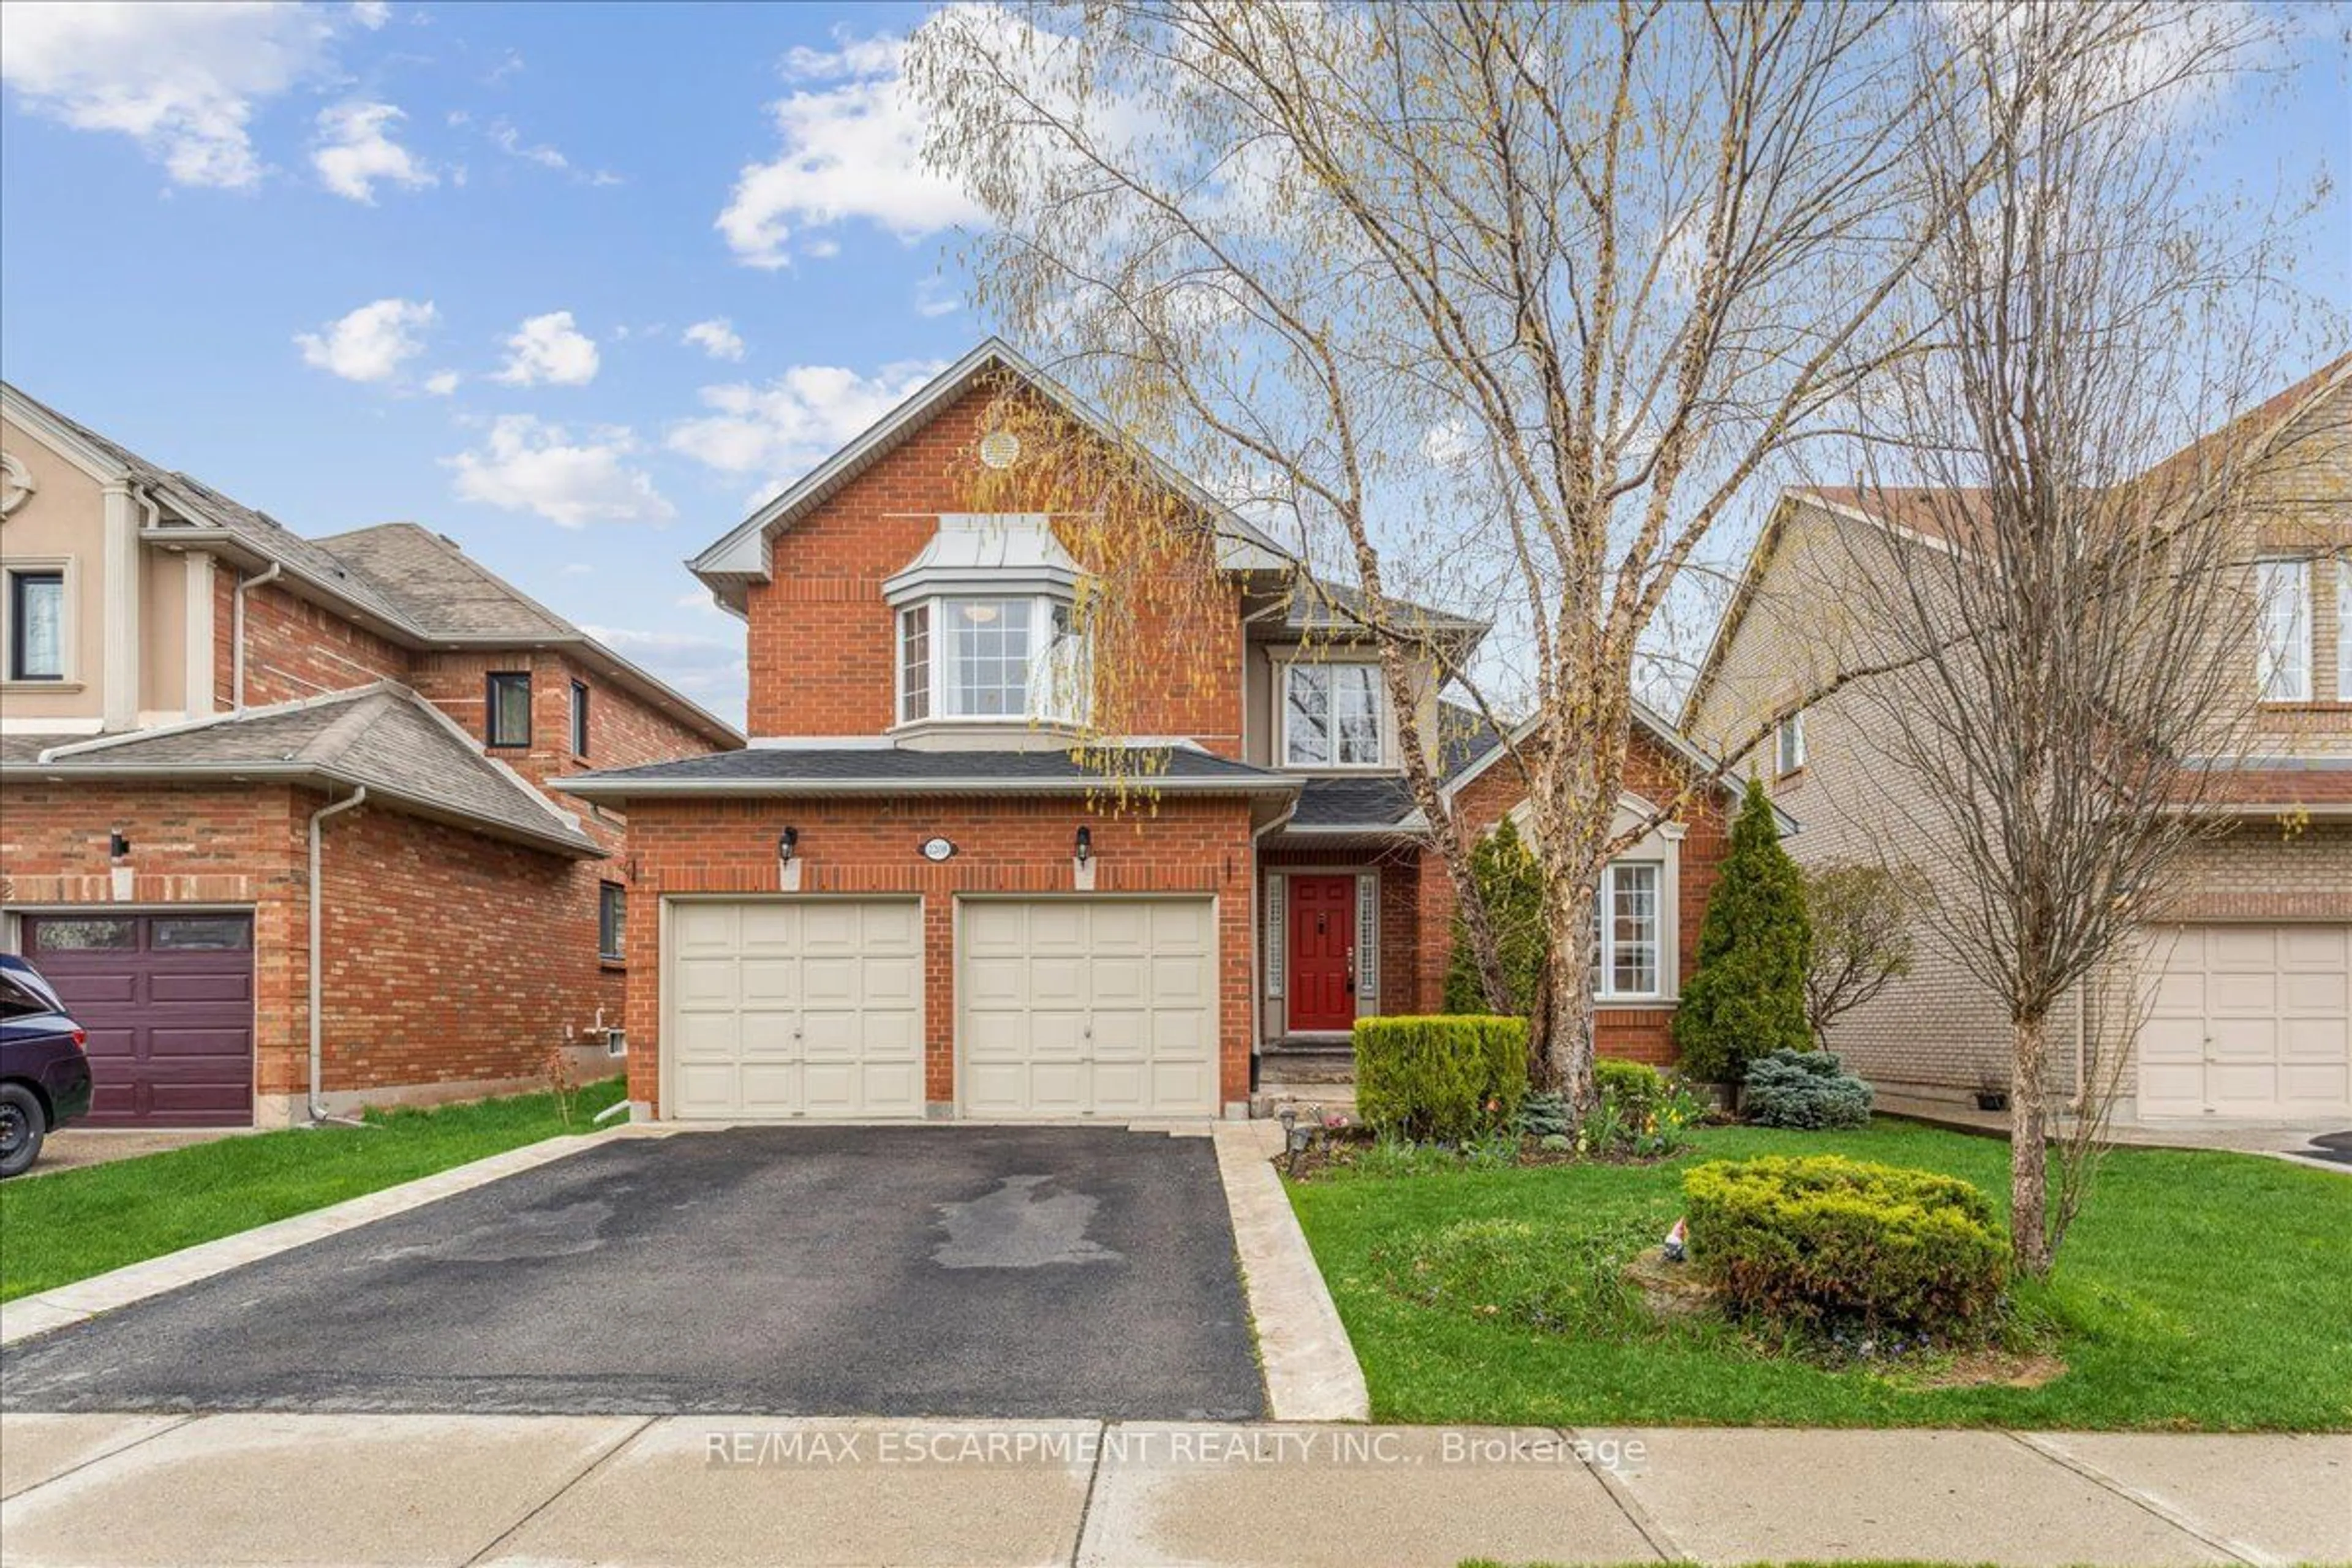 Home with brick exterior material for 2208 Rosemount Cres, Oakville Ontario L6M 3P4